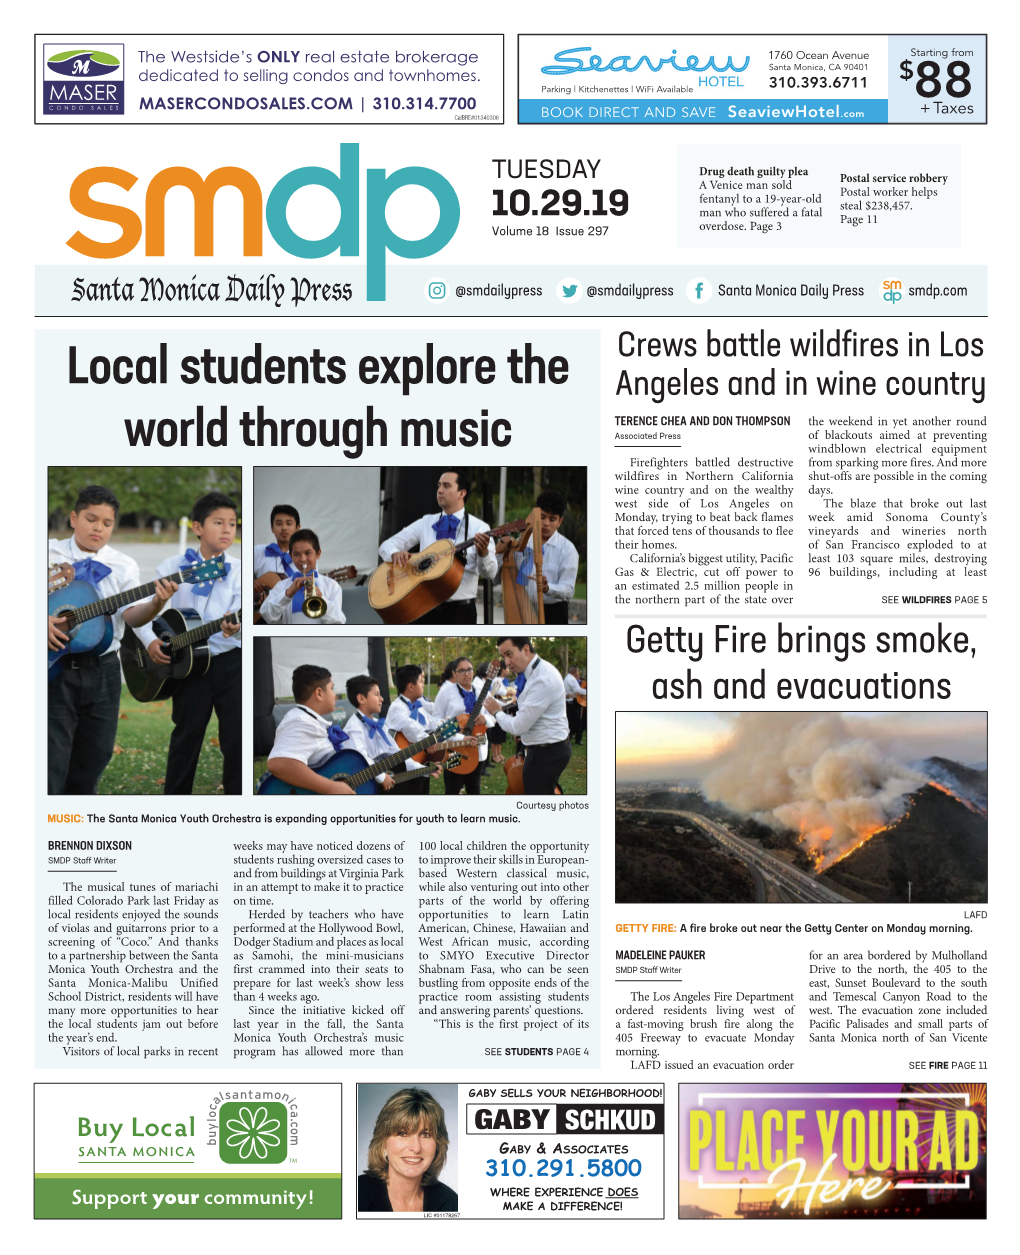 Local Students Explore the World Through Music